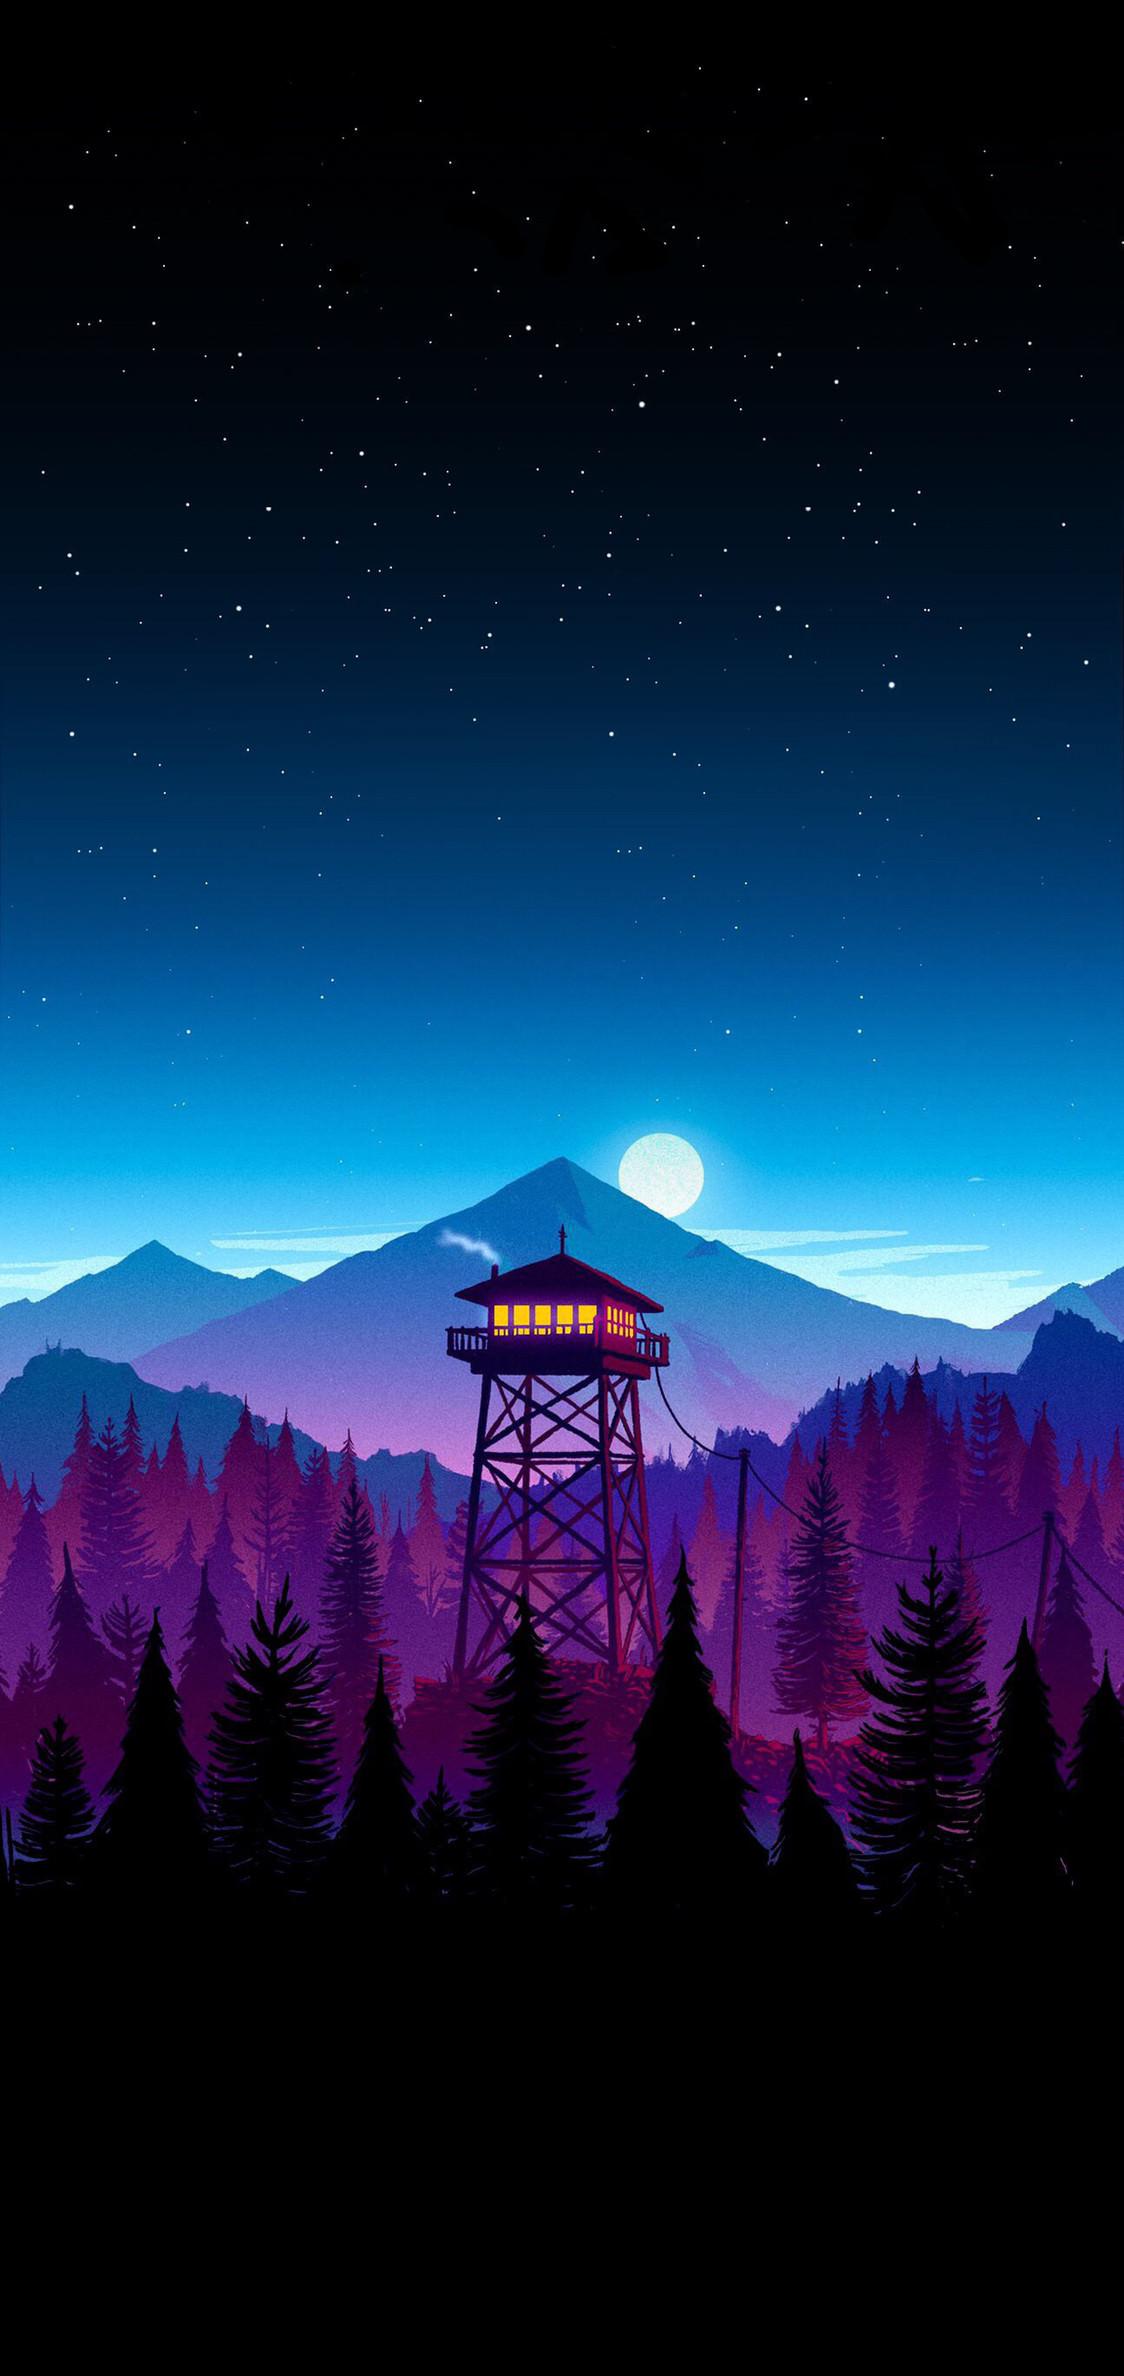 Firewatch At Night For IPhone X XS